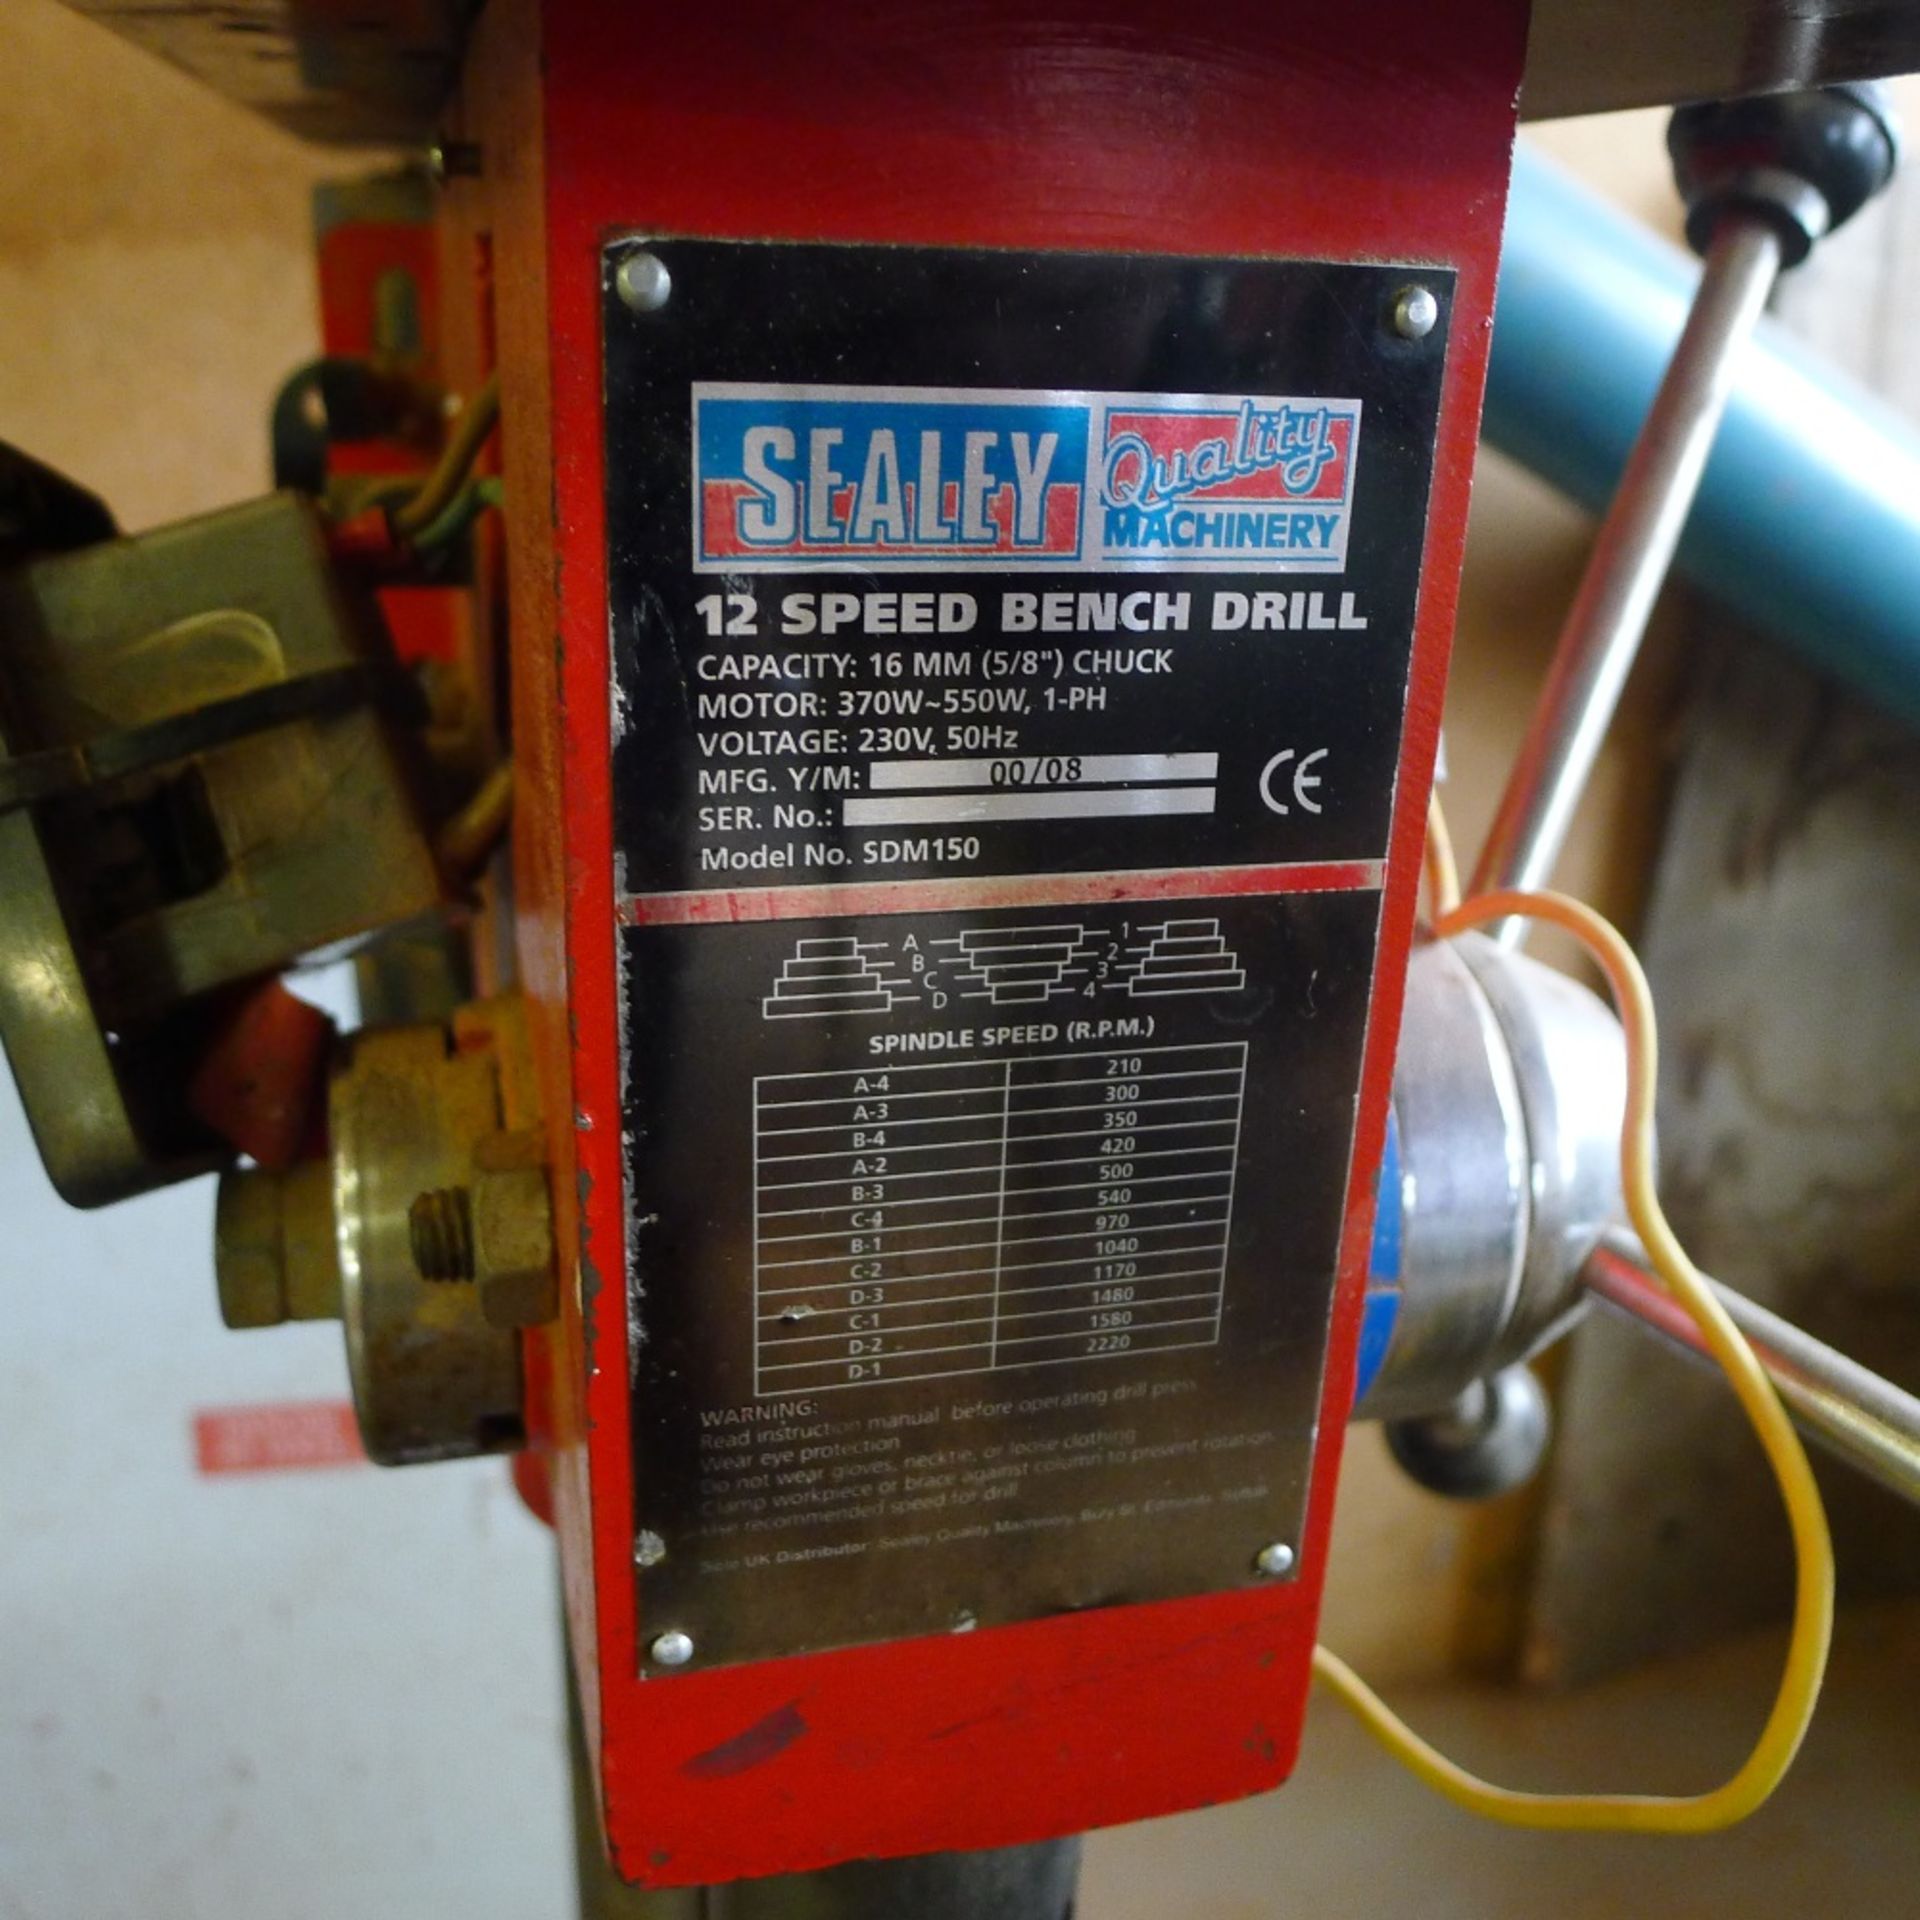 1 bench top pillar drill by Sealey type SDM 150, 240v – start / stop switch requires attention - Image 2 of 4